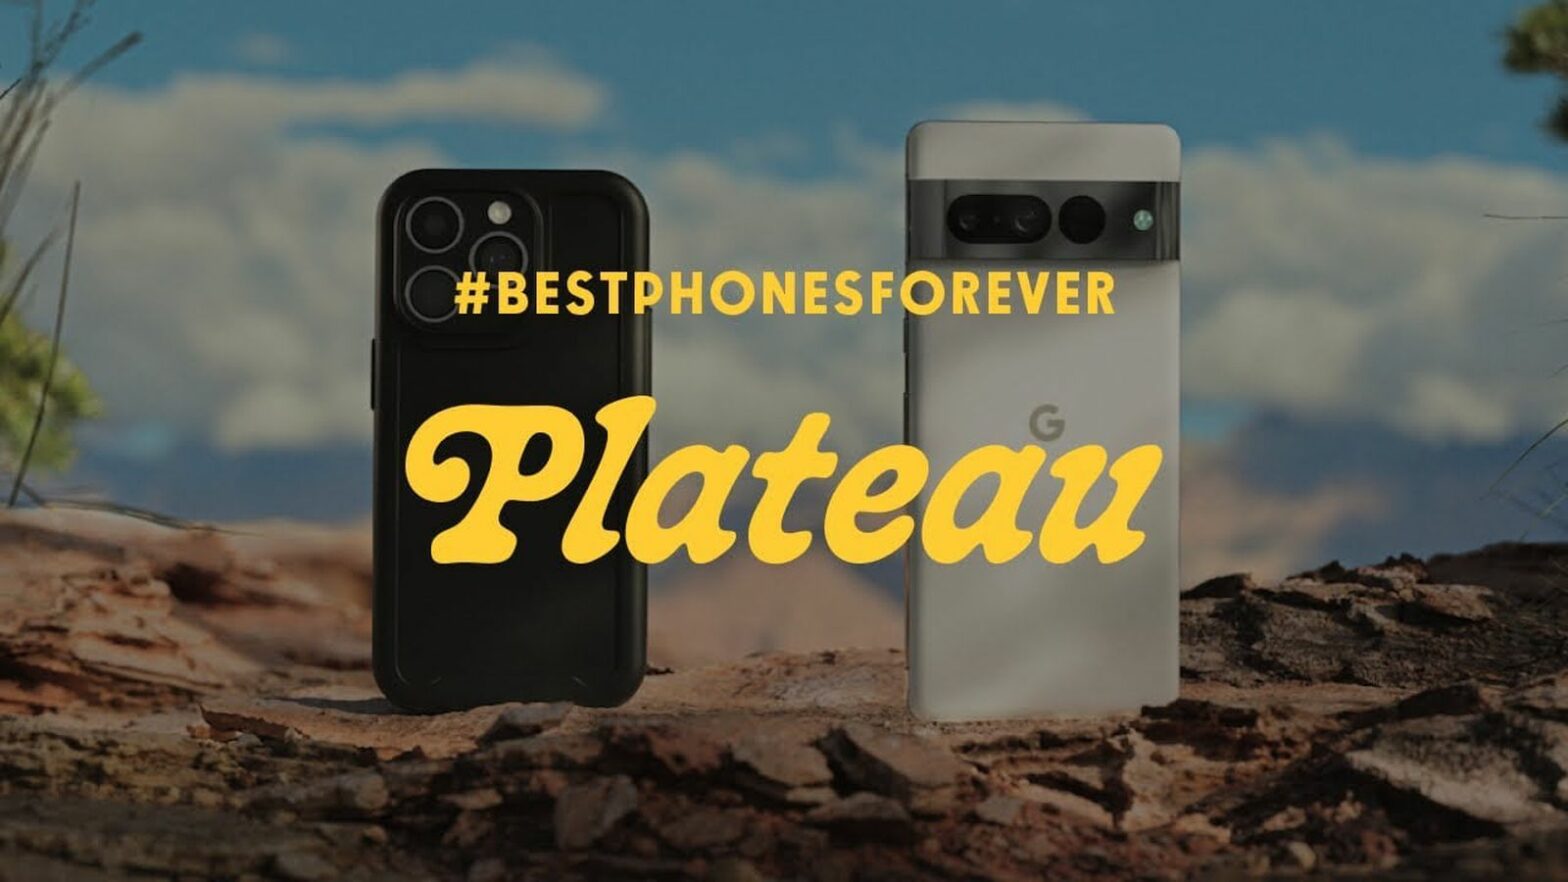 Google's Humorous New Pixel Ads Argue the iPhone Has Plateaued